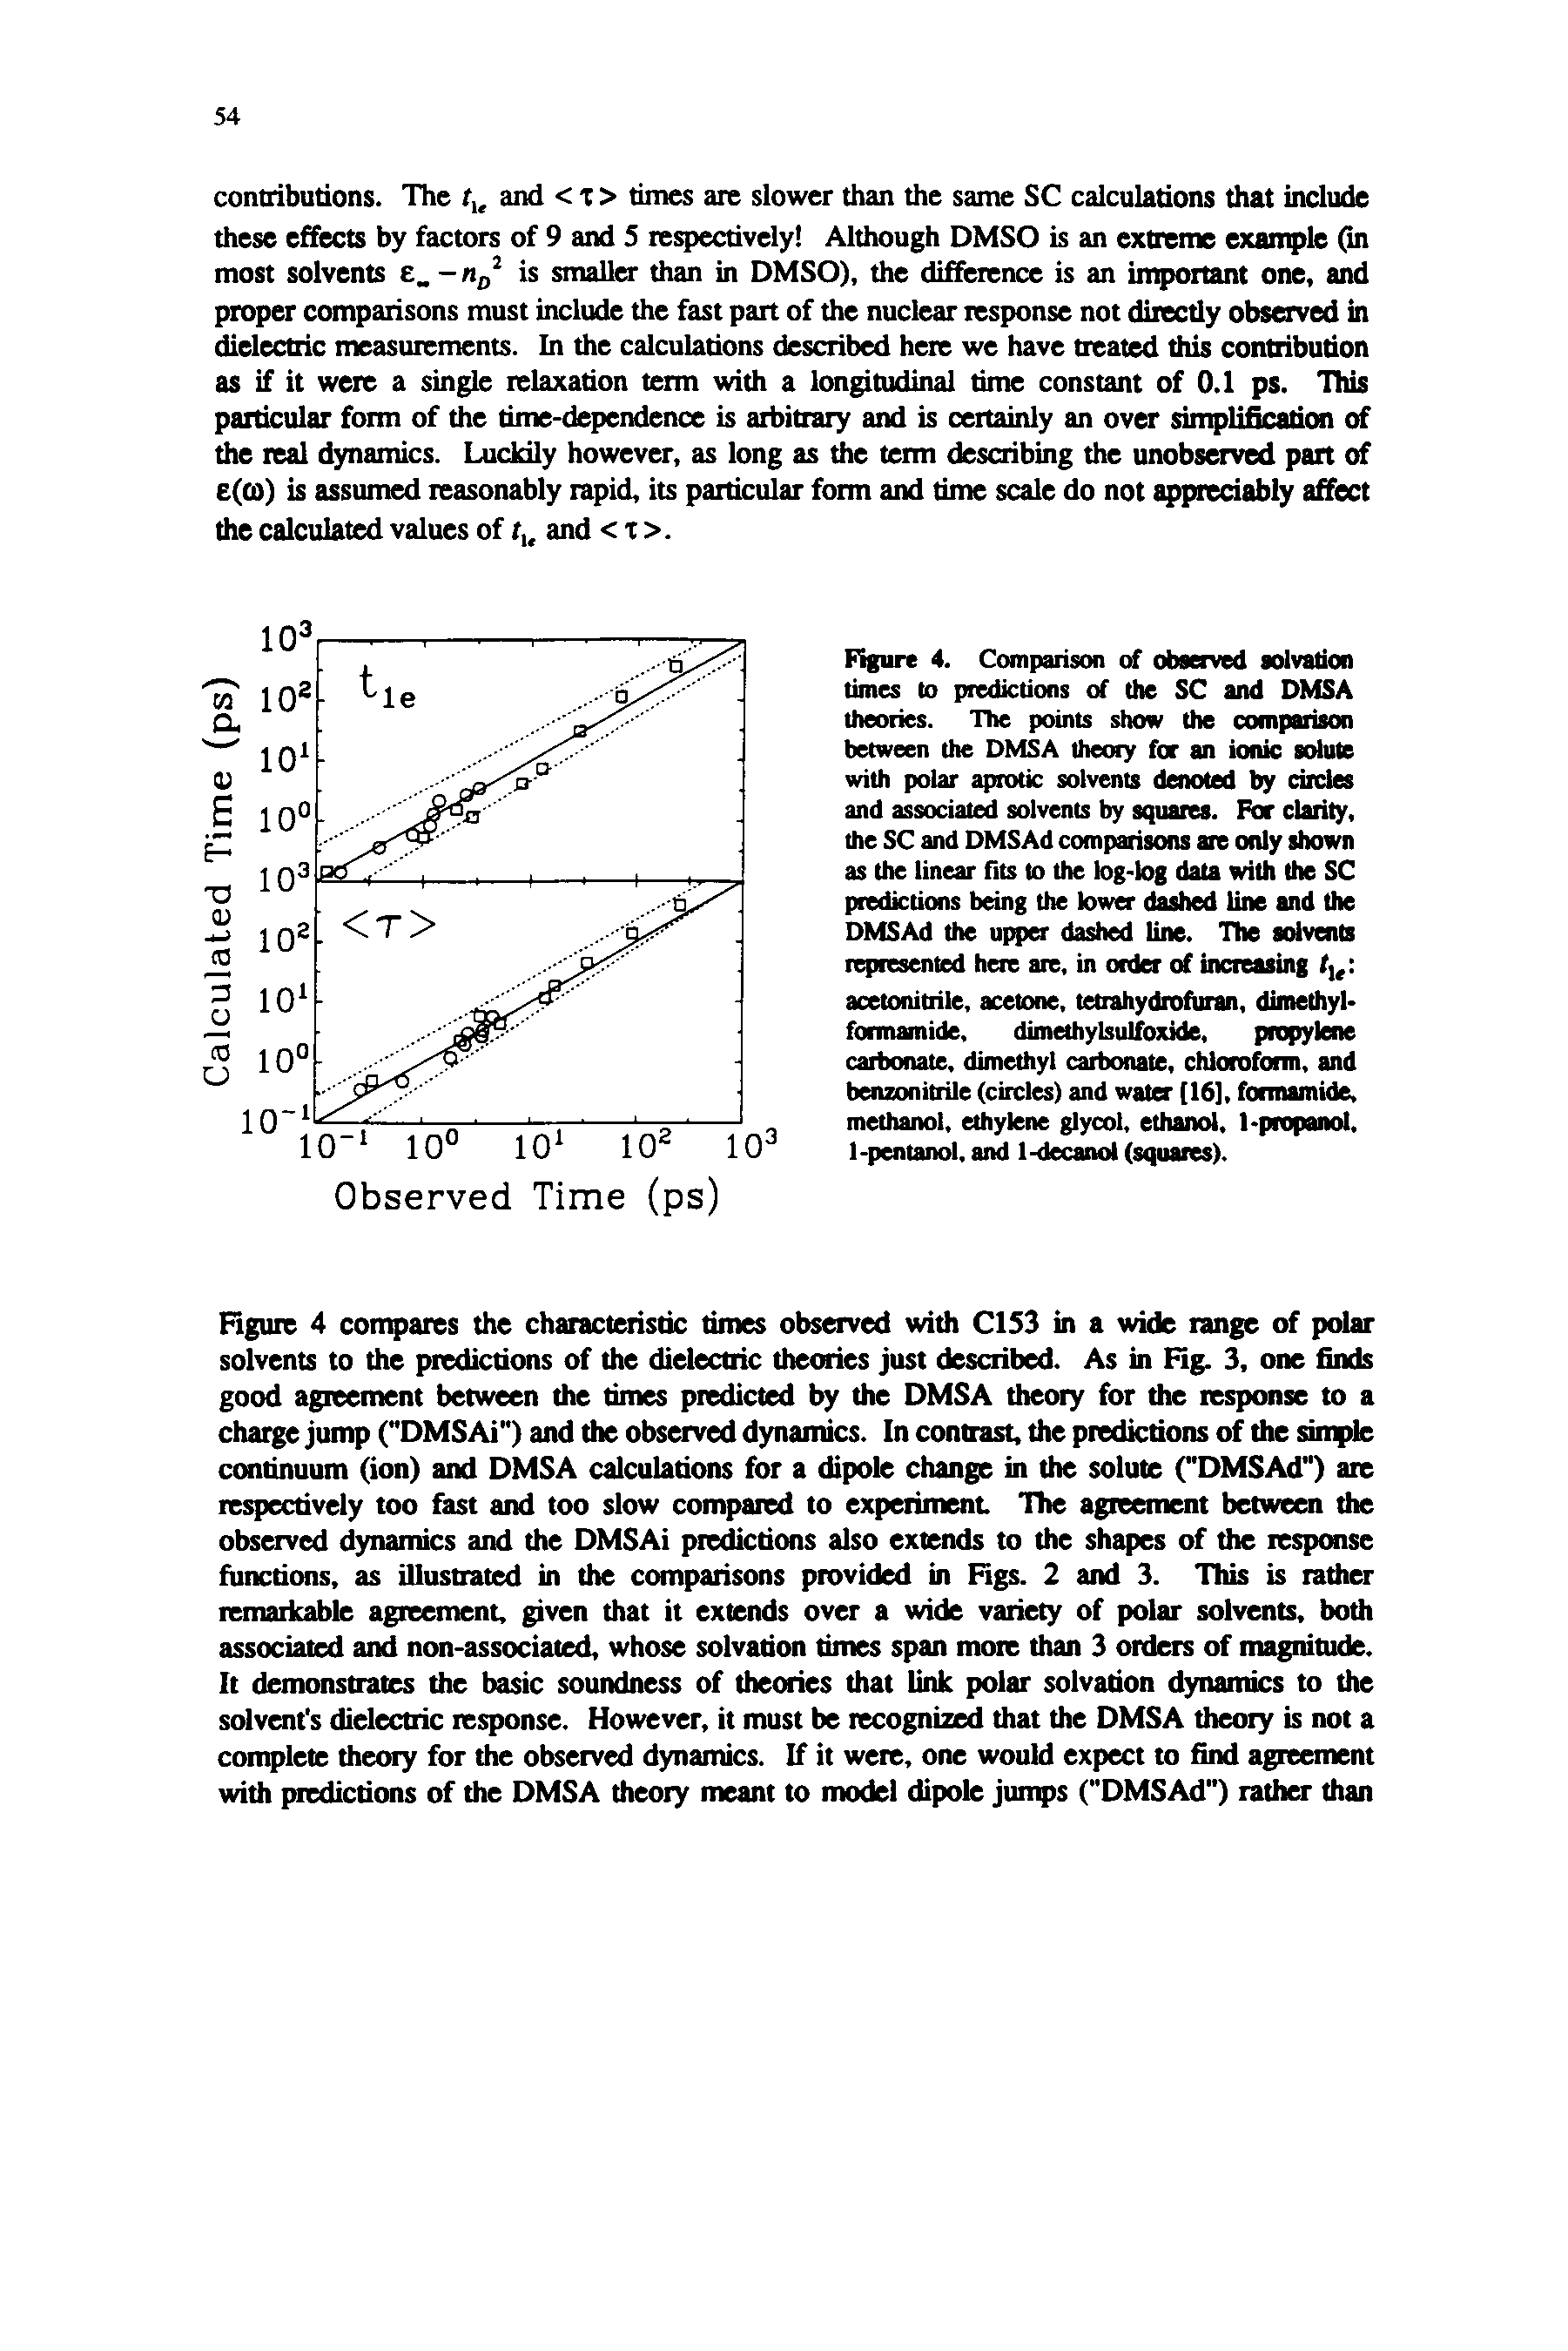 Figure 4. Comparison of observed solvation times to predictions of the SC and DMSA theories. The points show the comparison between the DMSA theoiy for an ionic solute with polar aptotic solvents denoted by circles and associated solvents by squares. For clarity, the SC and DMSAd comparisons are only shown as the linear fits to the log-log data with the SC predictions being the lower dashed line and the DMSAd the uiqjer dashed line. The solvents represented here are, in order of increasing fj, acetonitrile, acetone, tetrahydrofiiran, dimethyl-formamide, dimethylsulfoxide, propylm carbonate, dimethyl carbonate, chloroform, and benzonitrile (circles) and water [16], formamide, methanol, ethylene glycol, ethanol, 1-propanol, l-pentanol, and 1-decanol (squares).